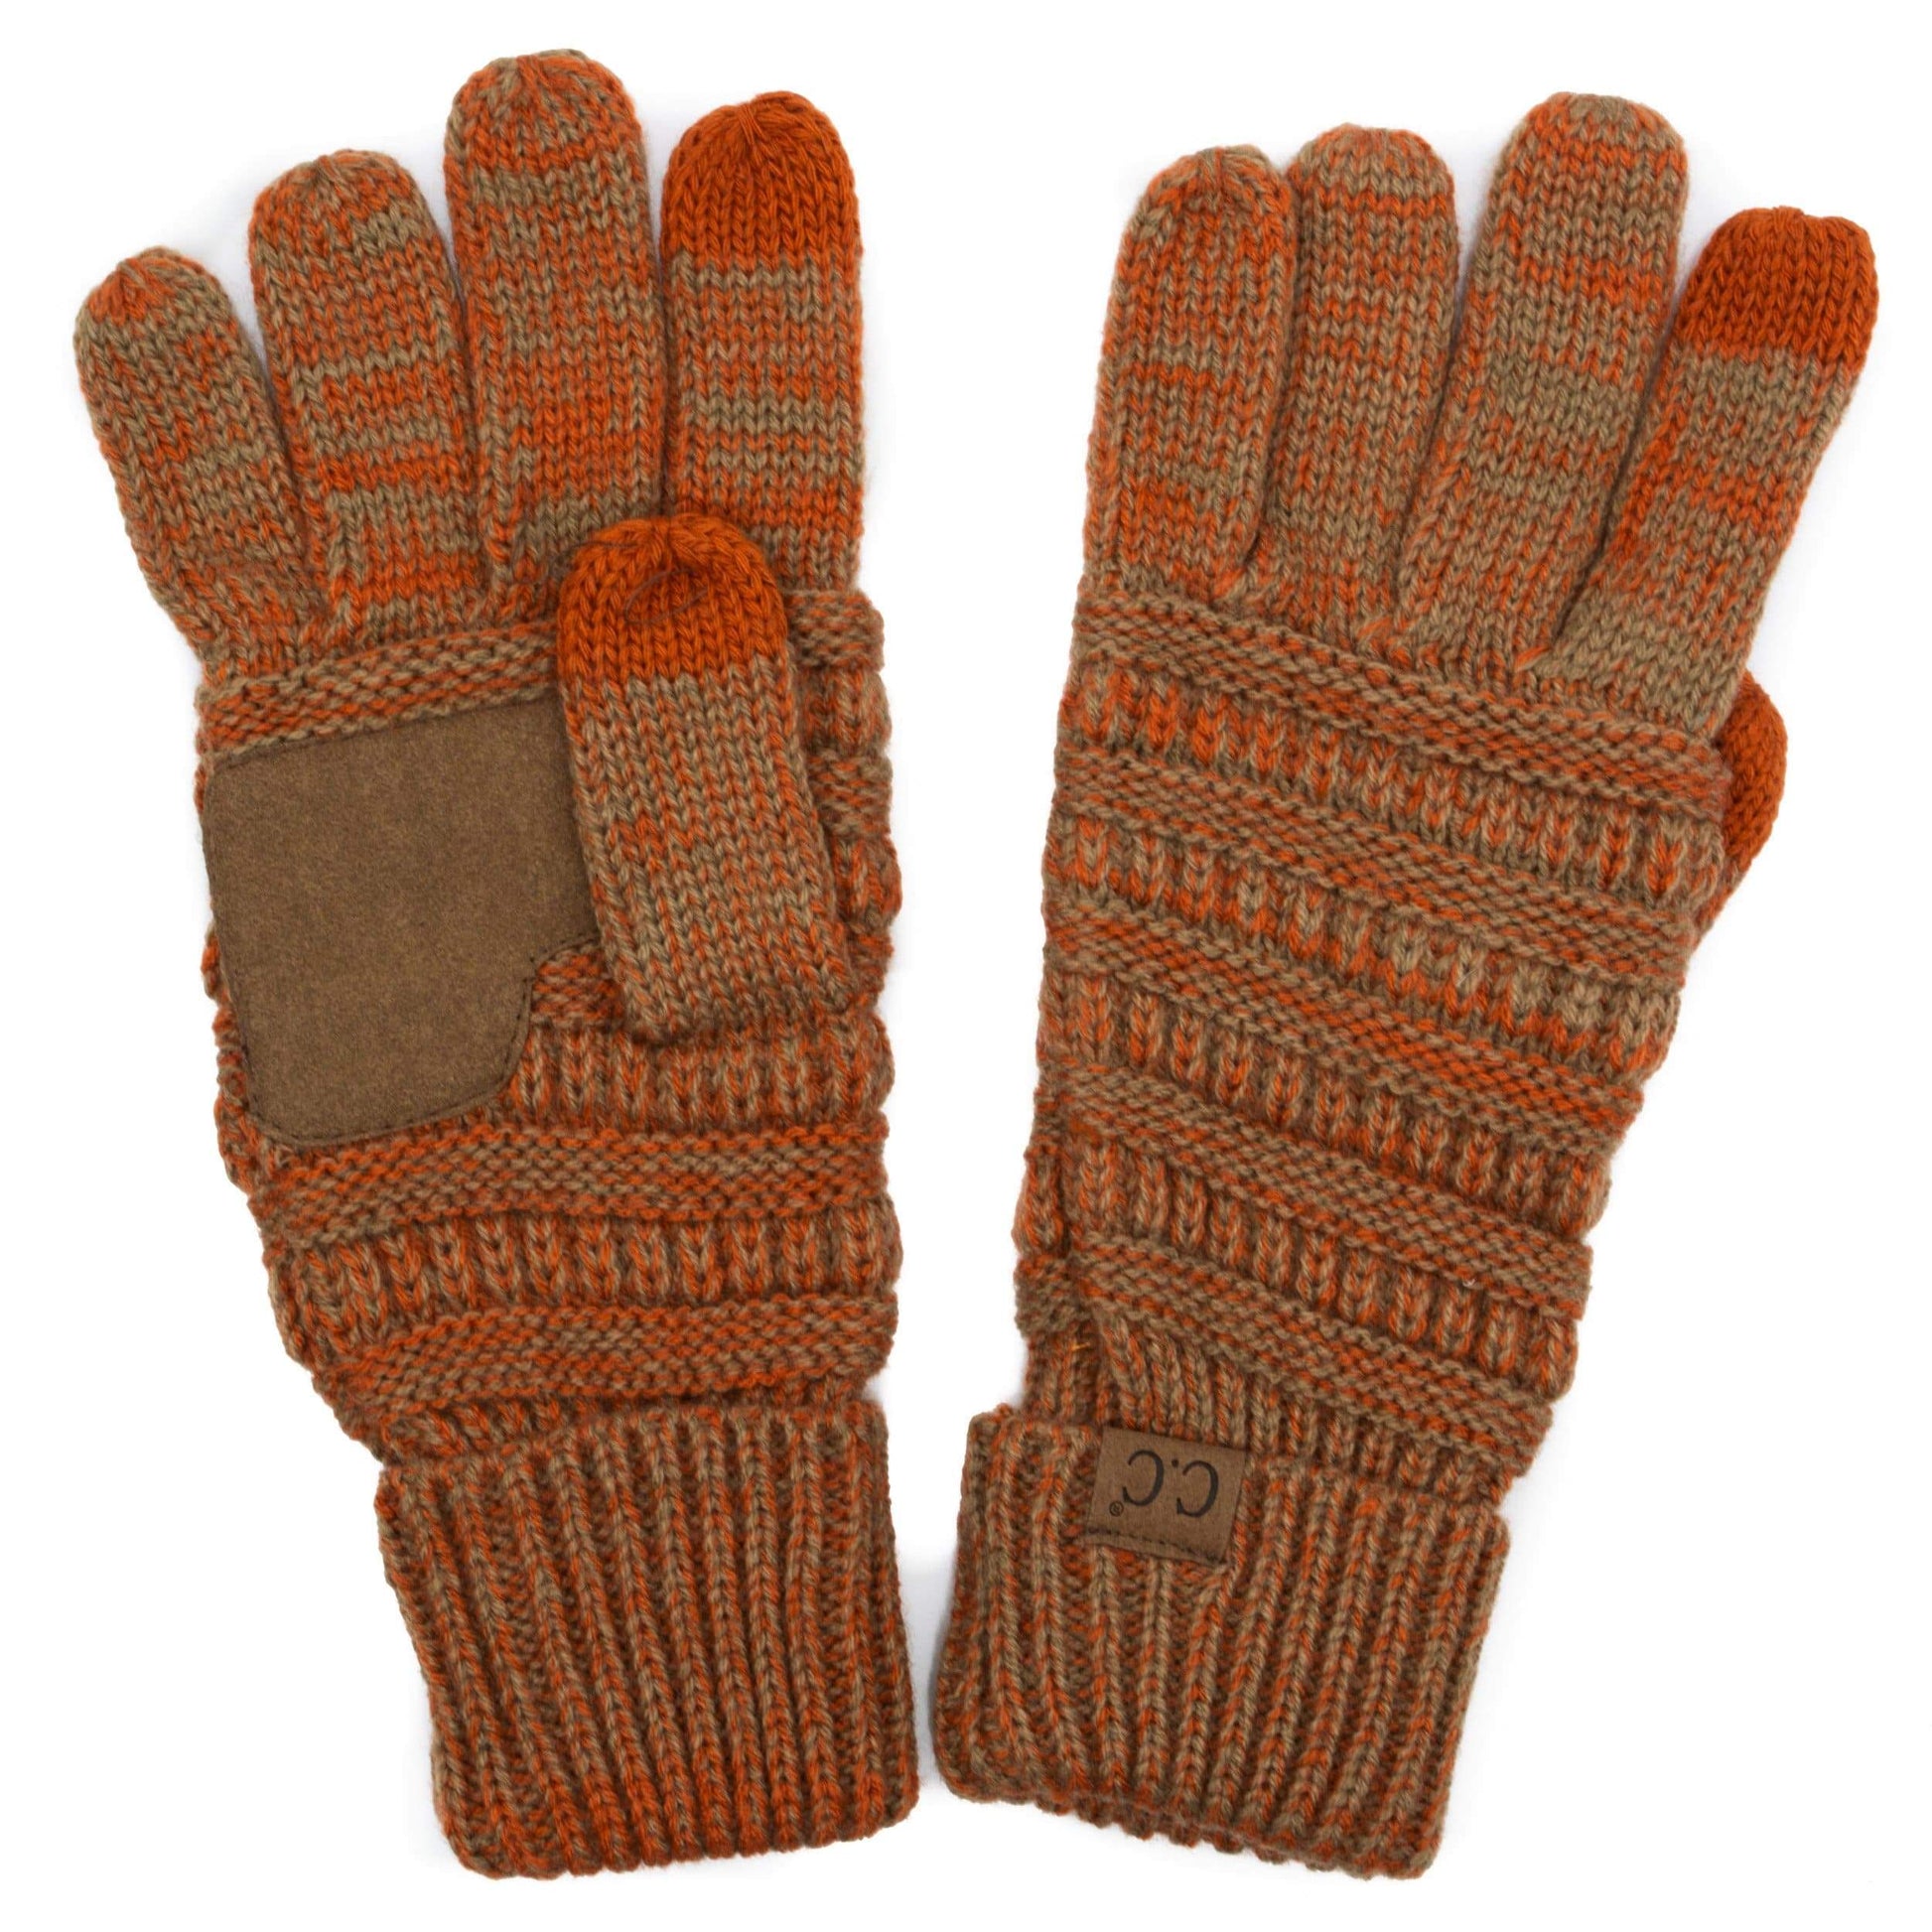 C.C Apparel Rust/Camel C.C Unisex Cable Knit Winter Warm Anti-Slip Two-Toned Touchscreen Texting Gloves